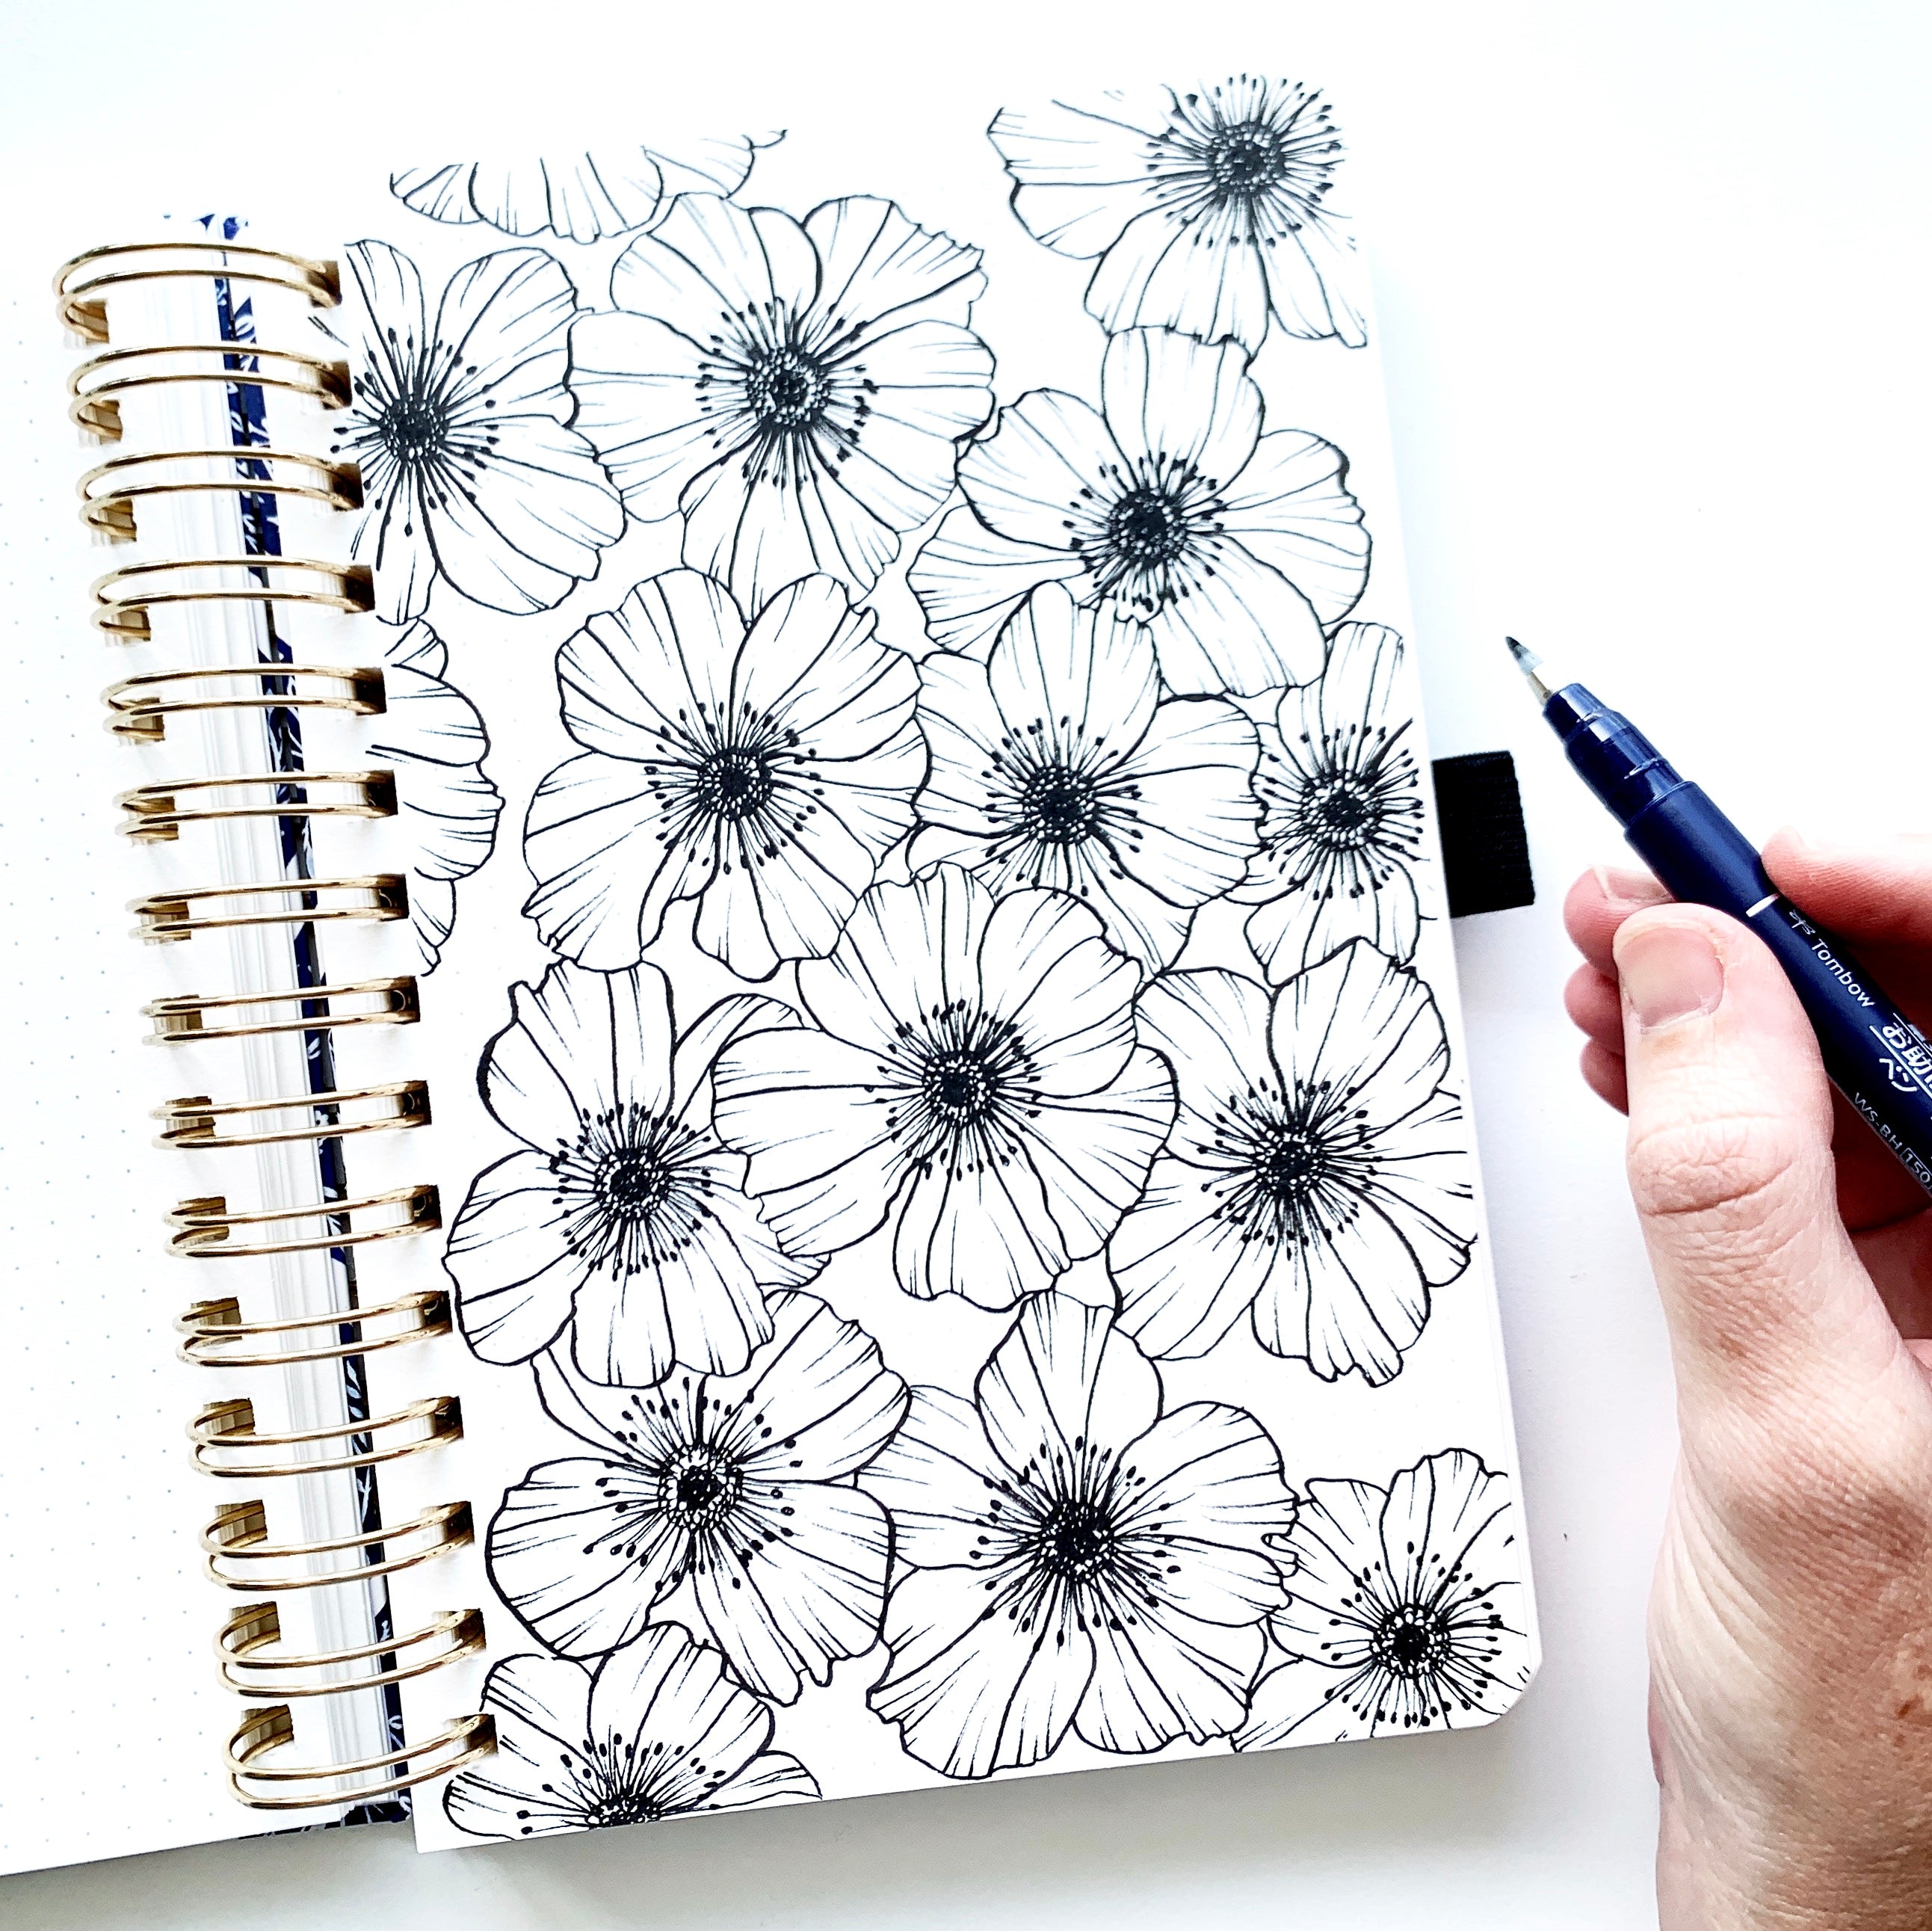 Learn how to draw and illustrate poppies with Adrienne from @studio80design!